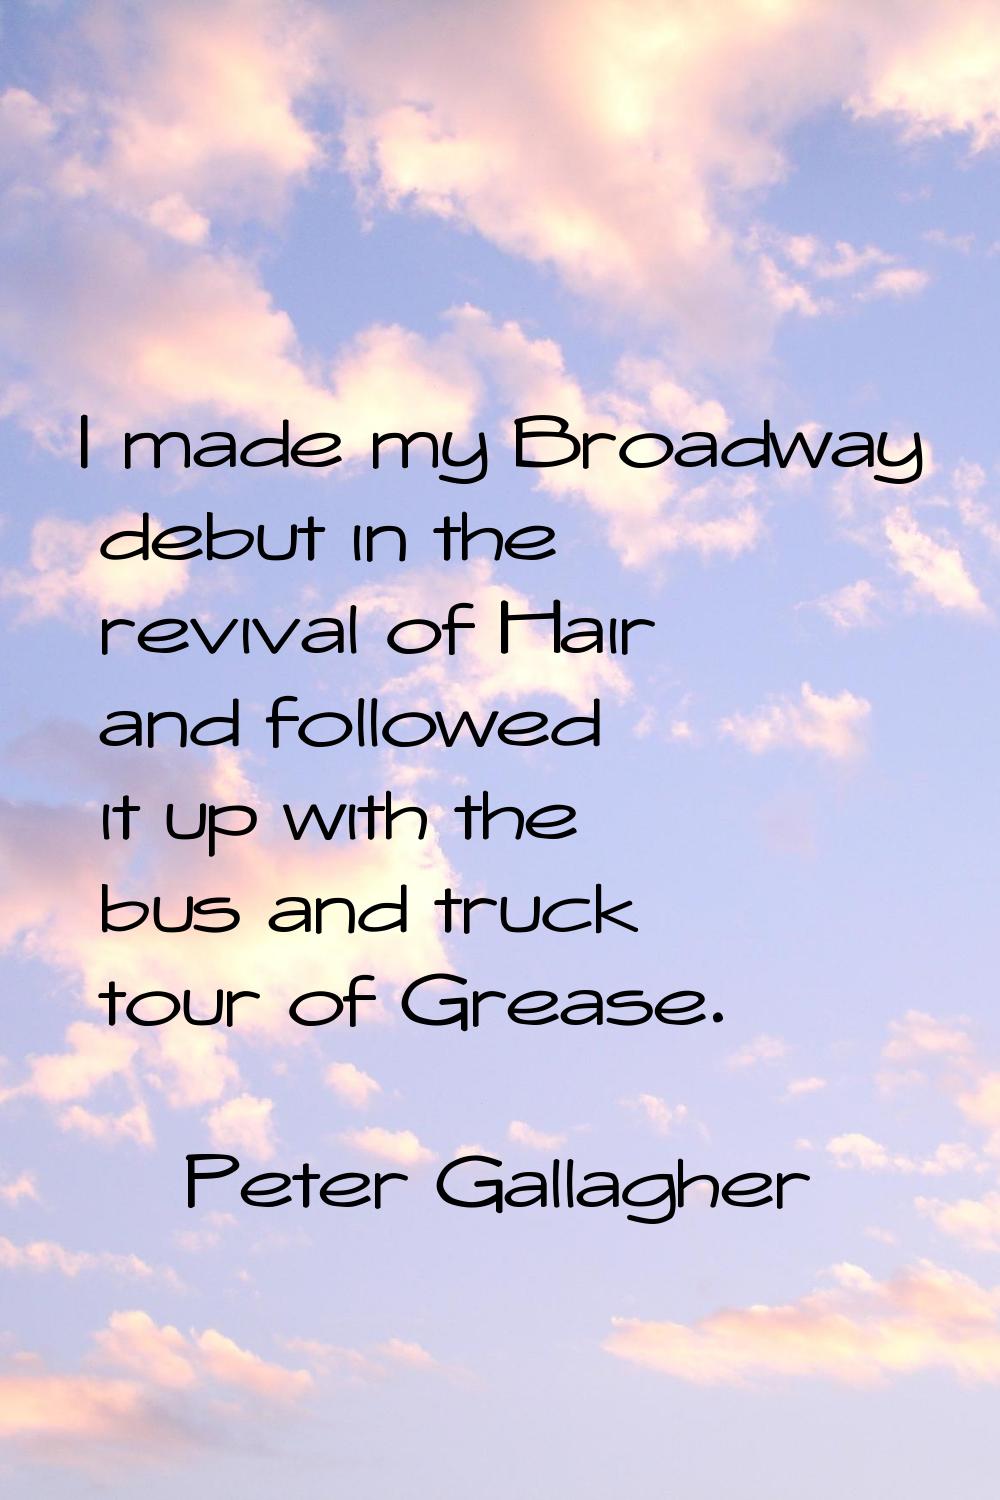 I made my Broadway debut in the revival of Hair and followed it up with the bus and truck tour of G